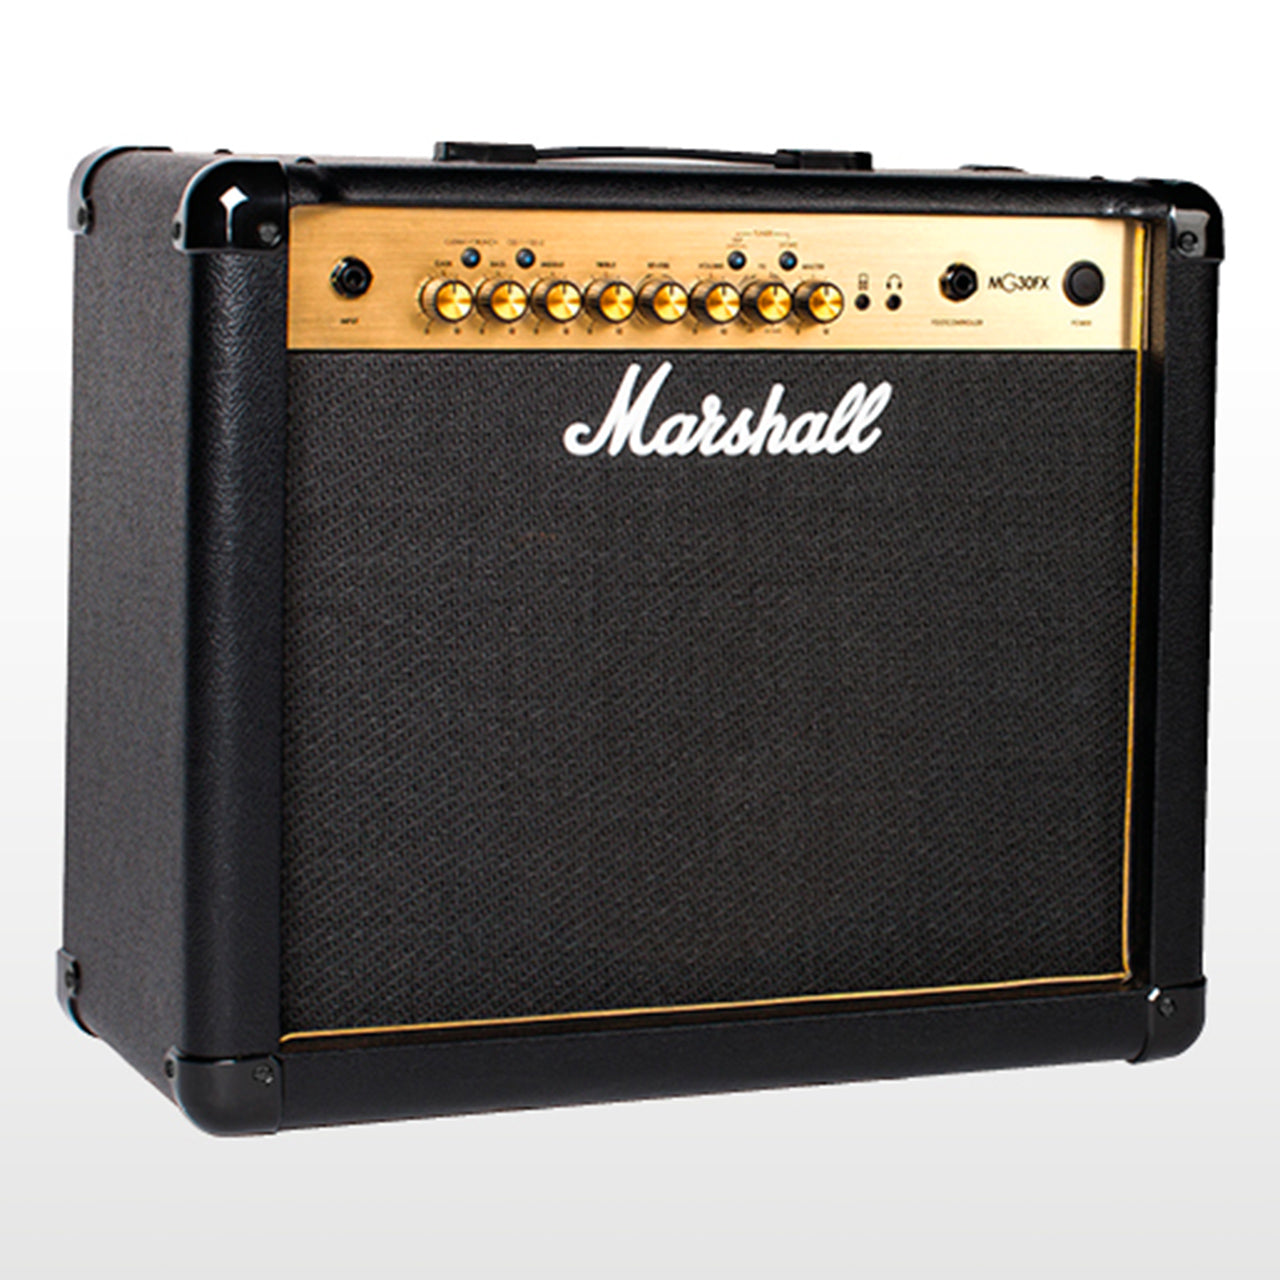 Marshall MG30GFX Combo Guitar Amplifier With Effects, 30W, angle 2